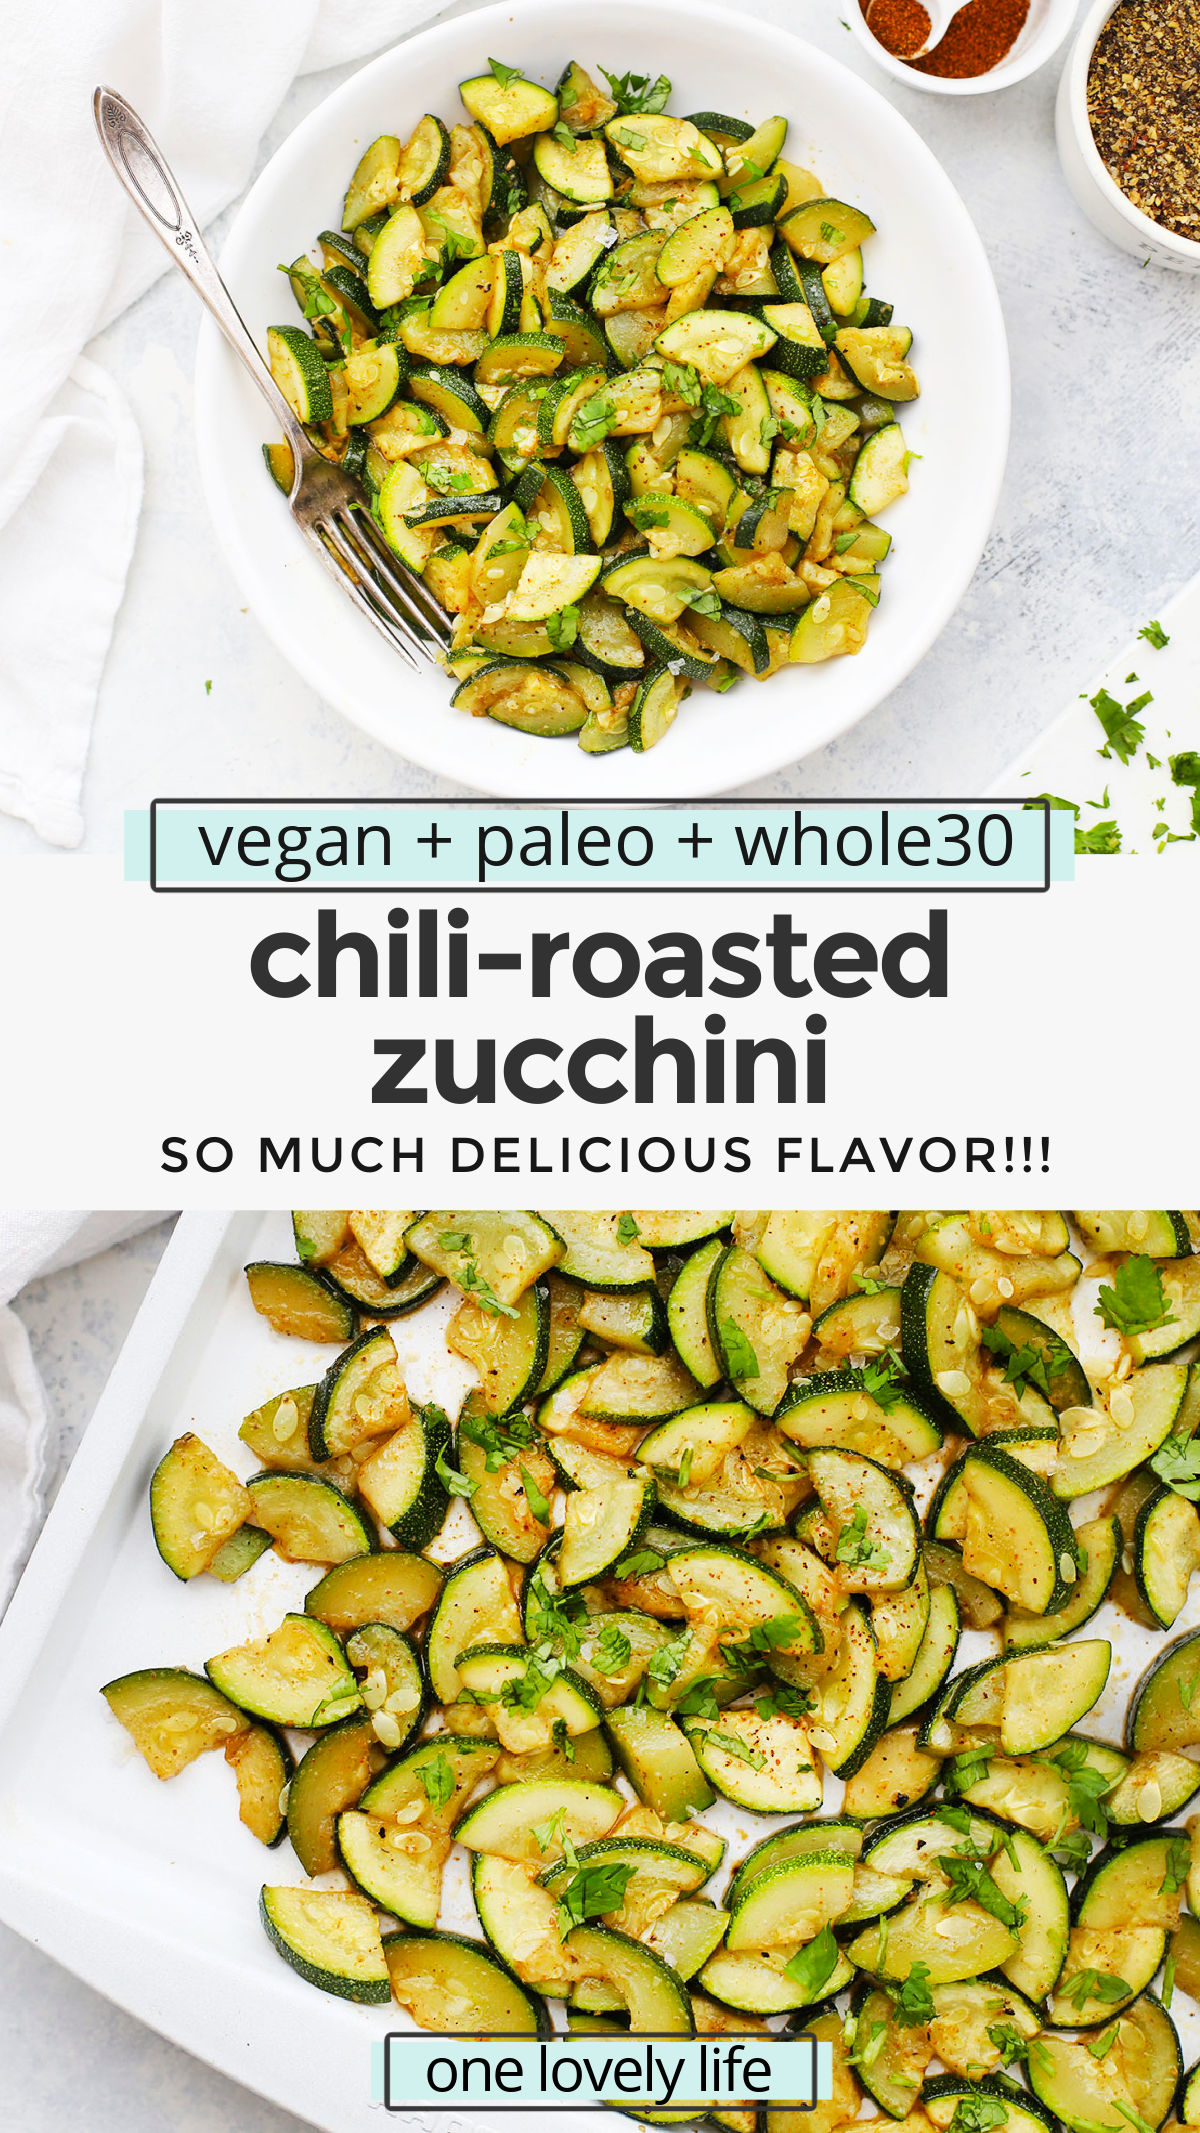 Chili Roasted Zucchini - This easy zucchini recipe is one of our favorites. Simple spices make these zucchini wedges the perfect easy side dish! (Paleo, Vegan, and Whole30 approved!) // Gluten free // #glutenfree #zucchini #healthyrecipe #vegan #whole30 #vegan #vegetarian #dairyfree